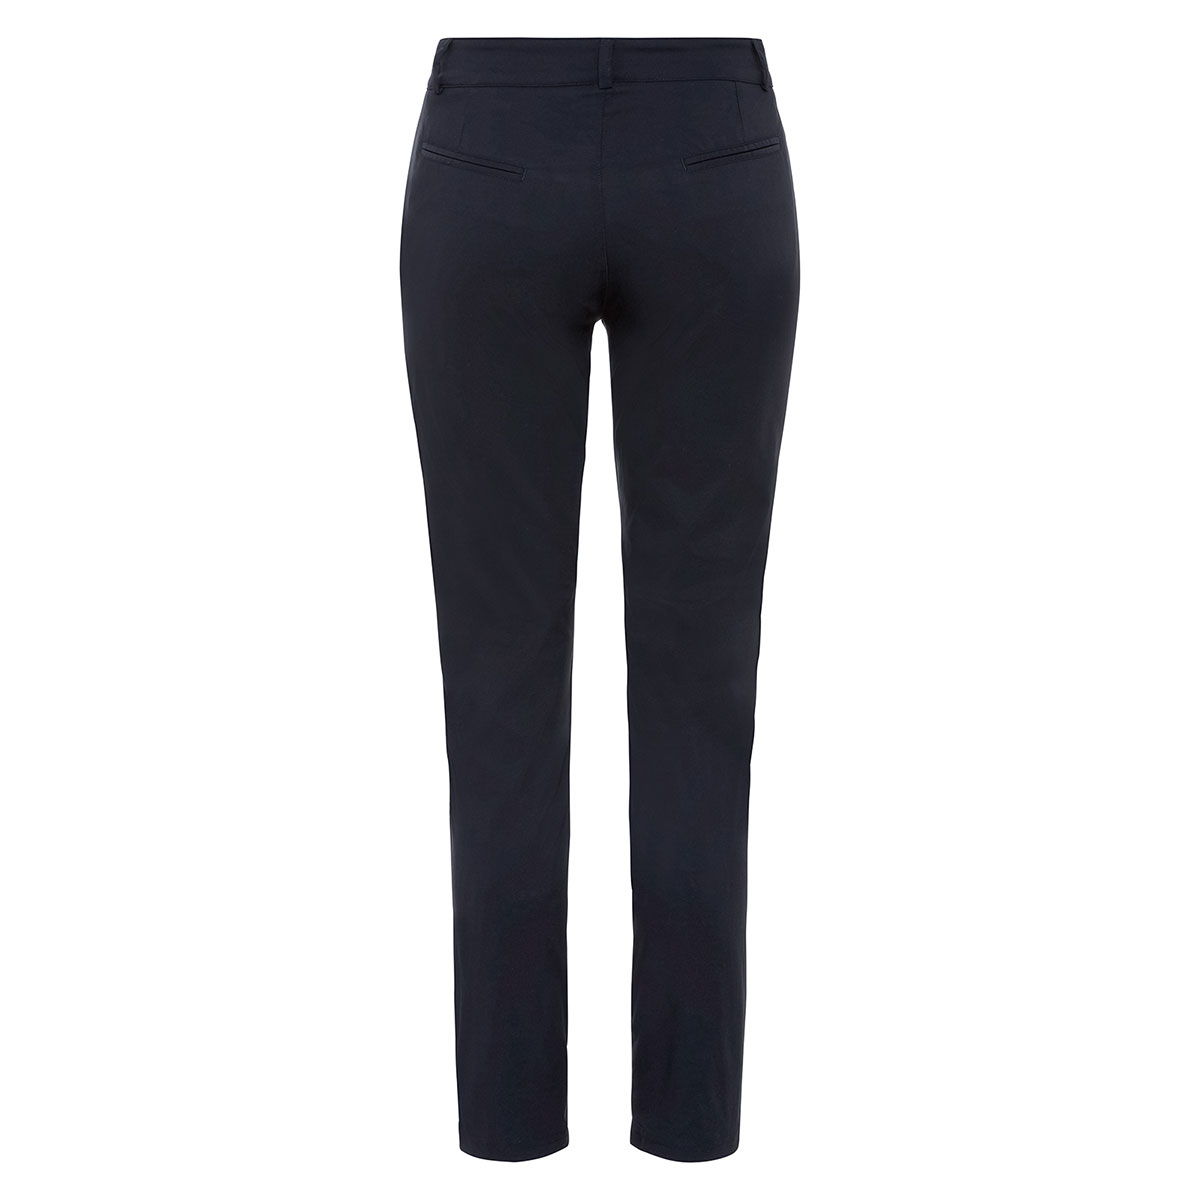 GOLFINO Ladies Drive Tech Trousers from american golf